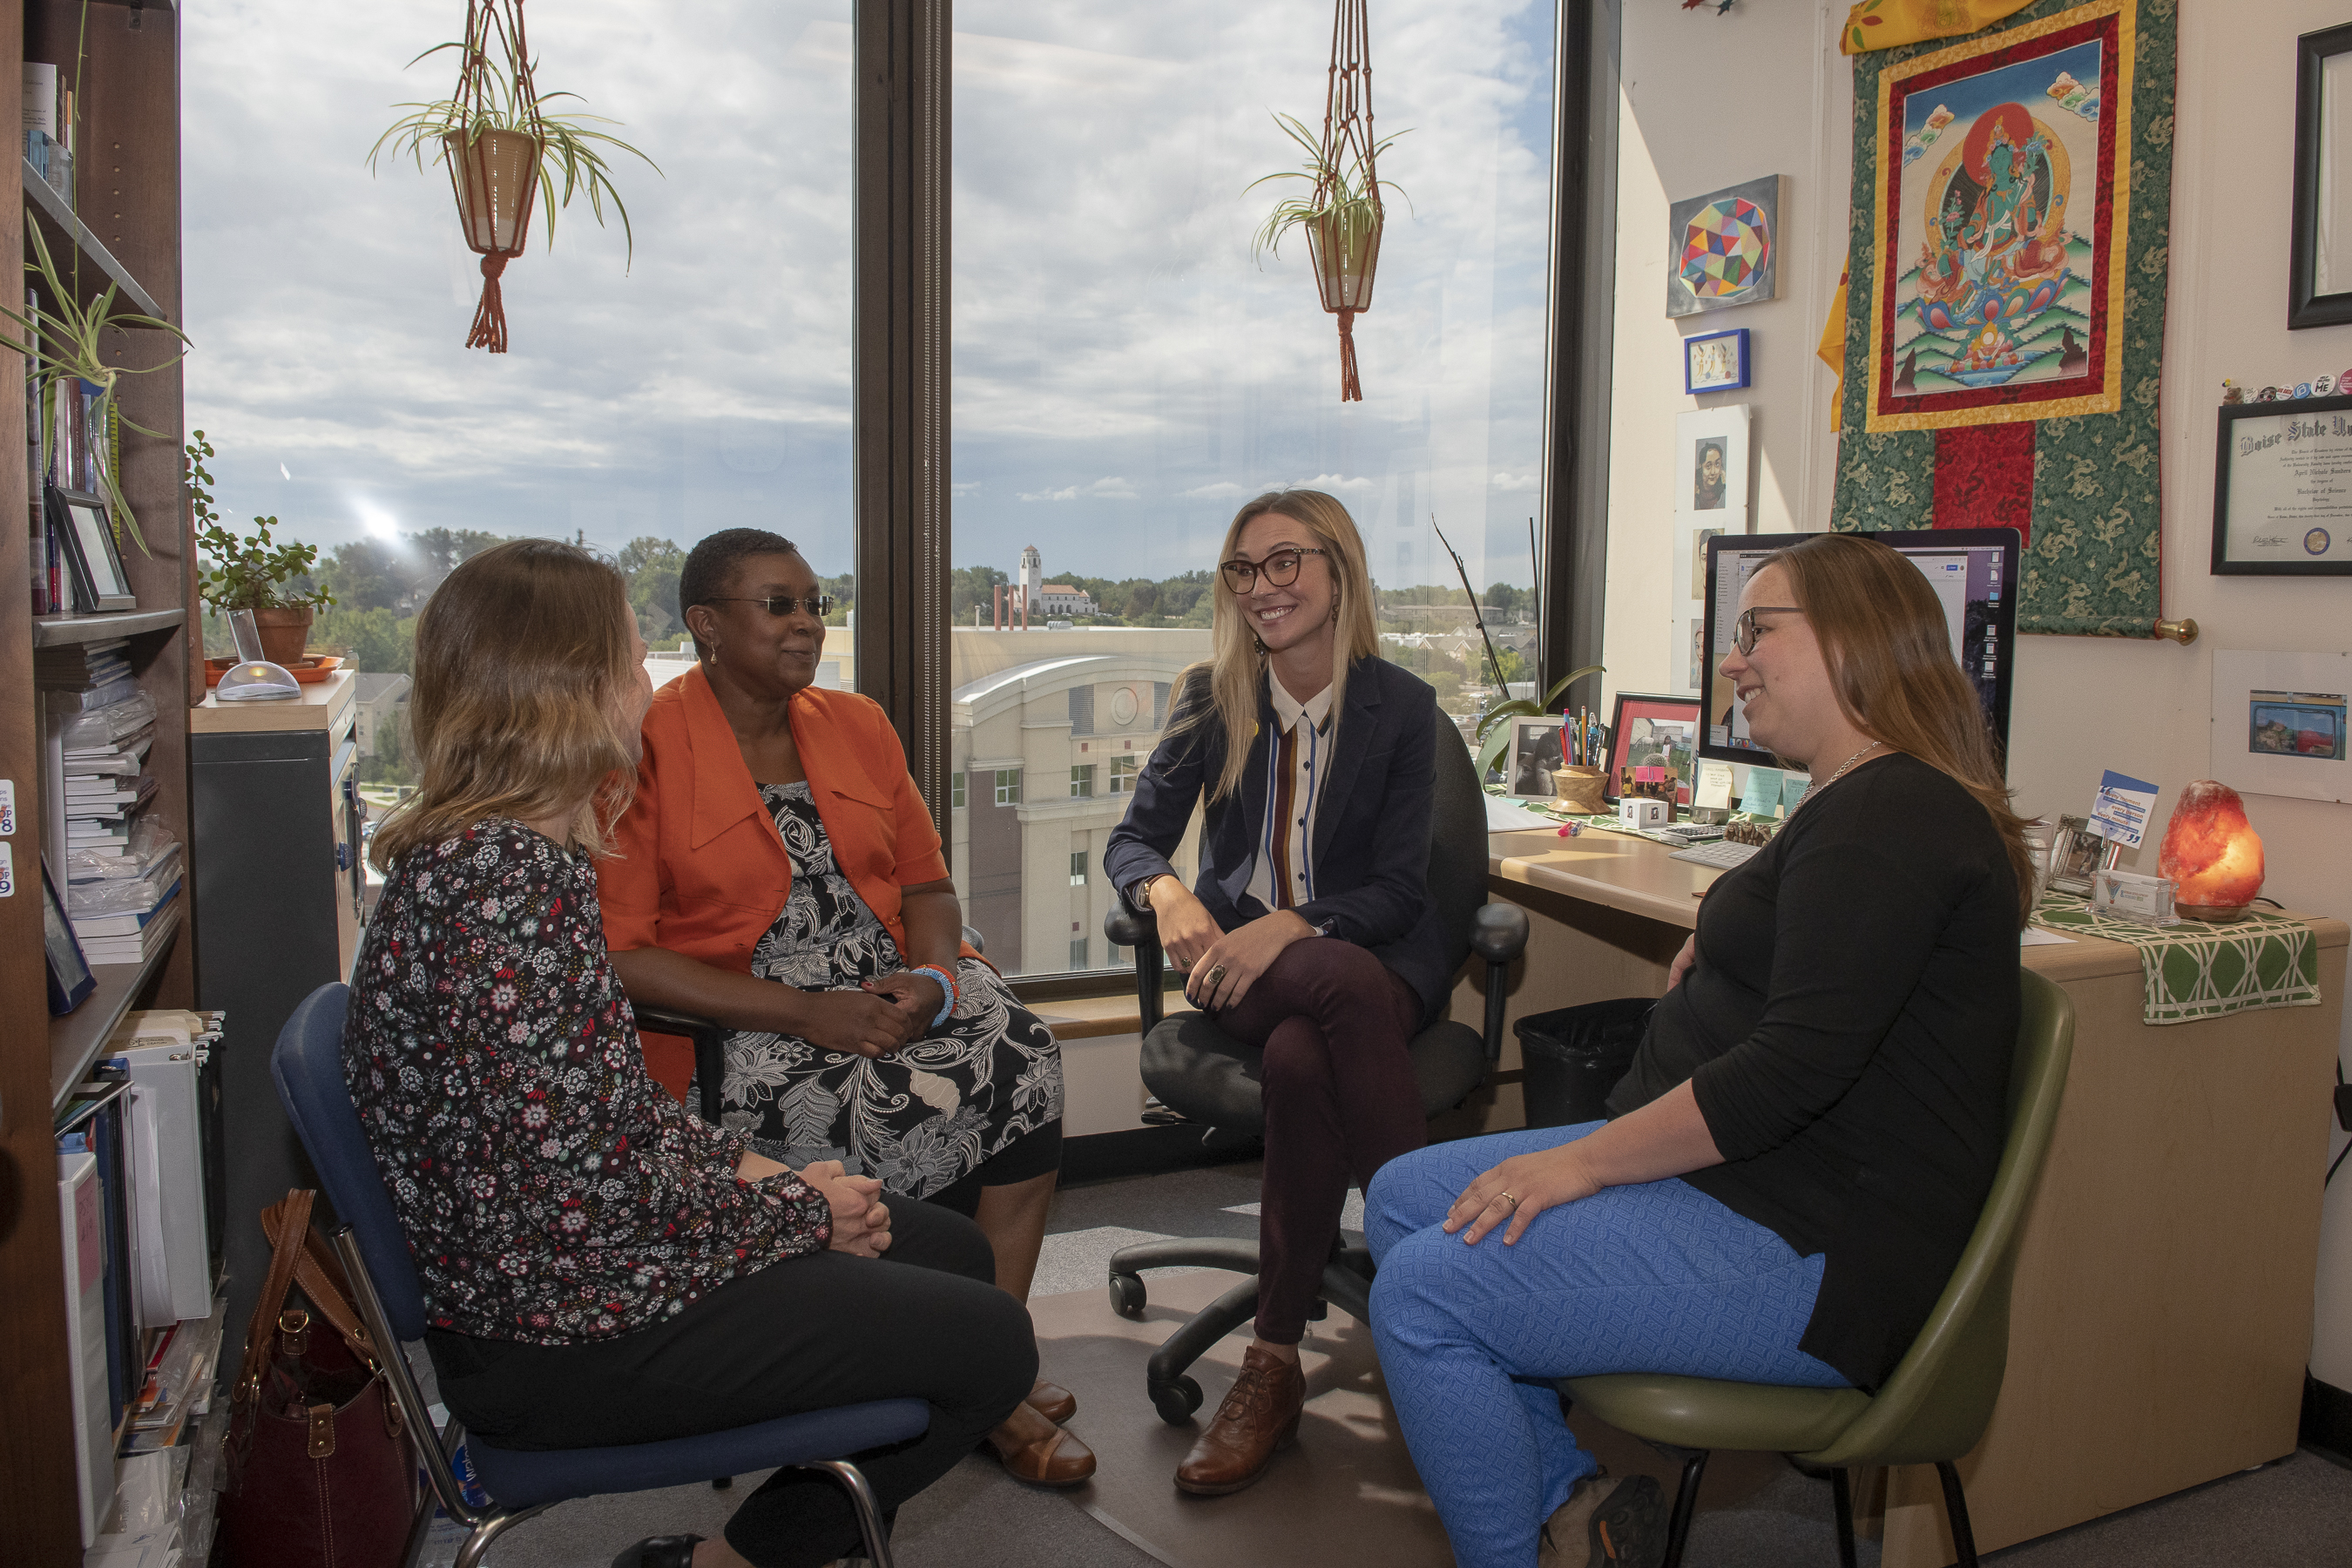 Four women converse together in office